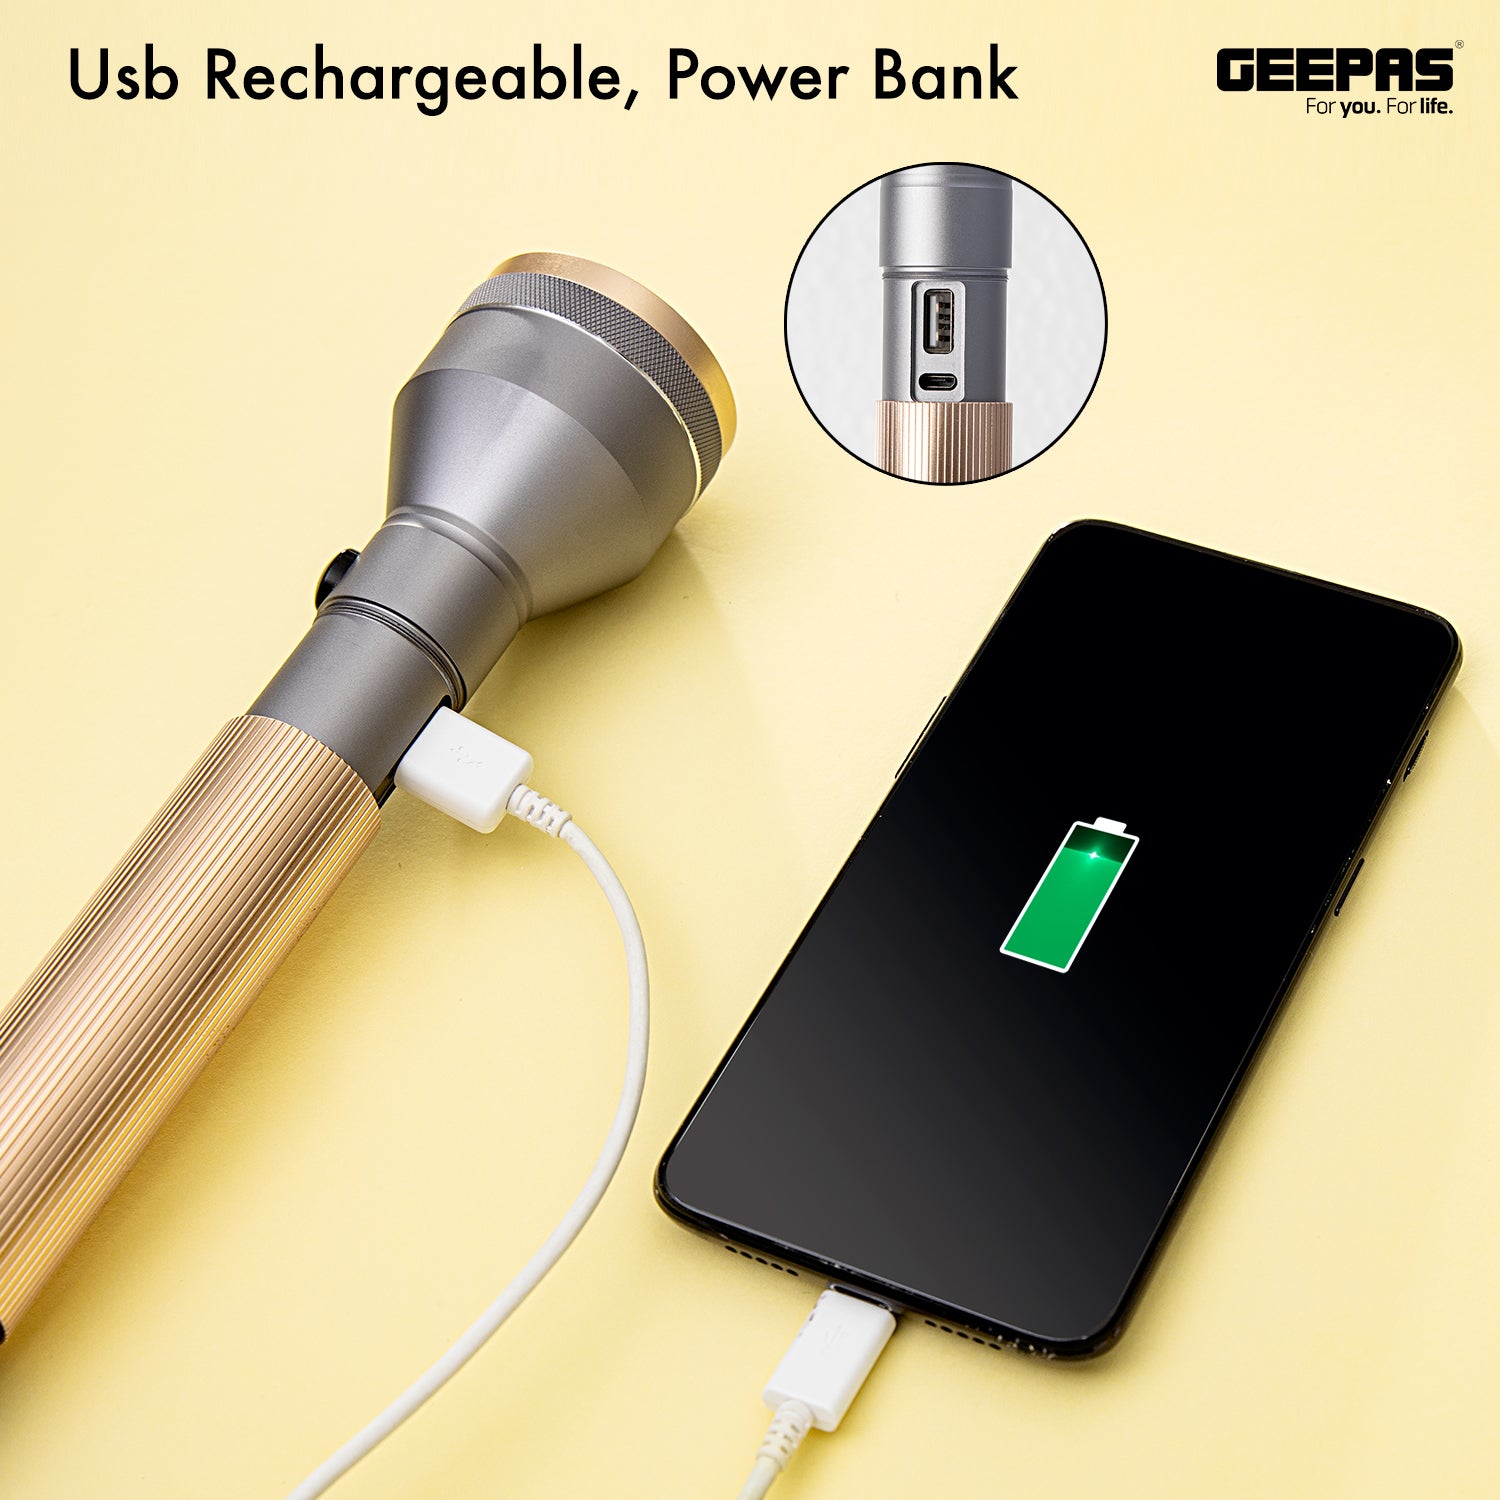 Geepas | For you. For life. 340 Lumens Rose Gold LED Torch With Power Bank Lighting